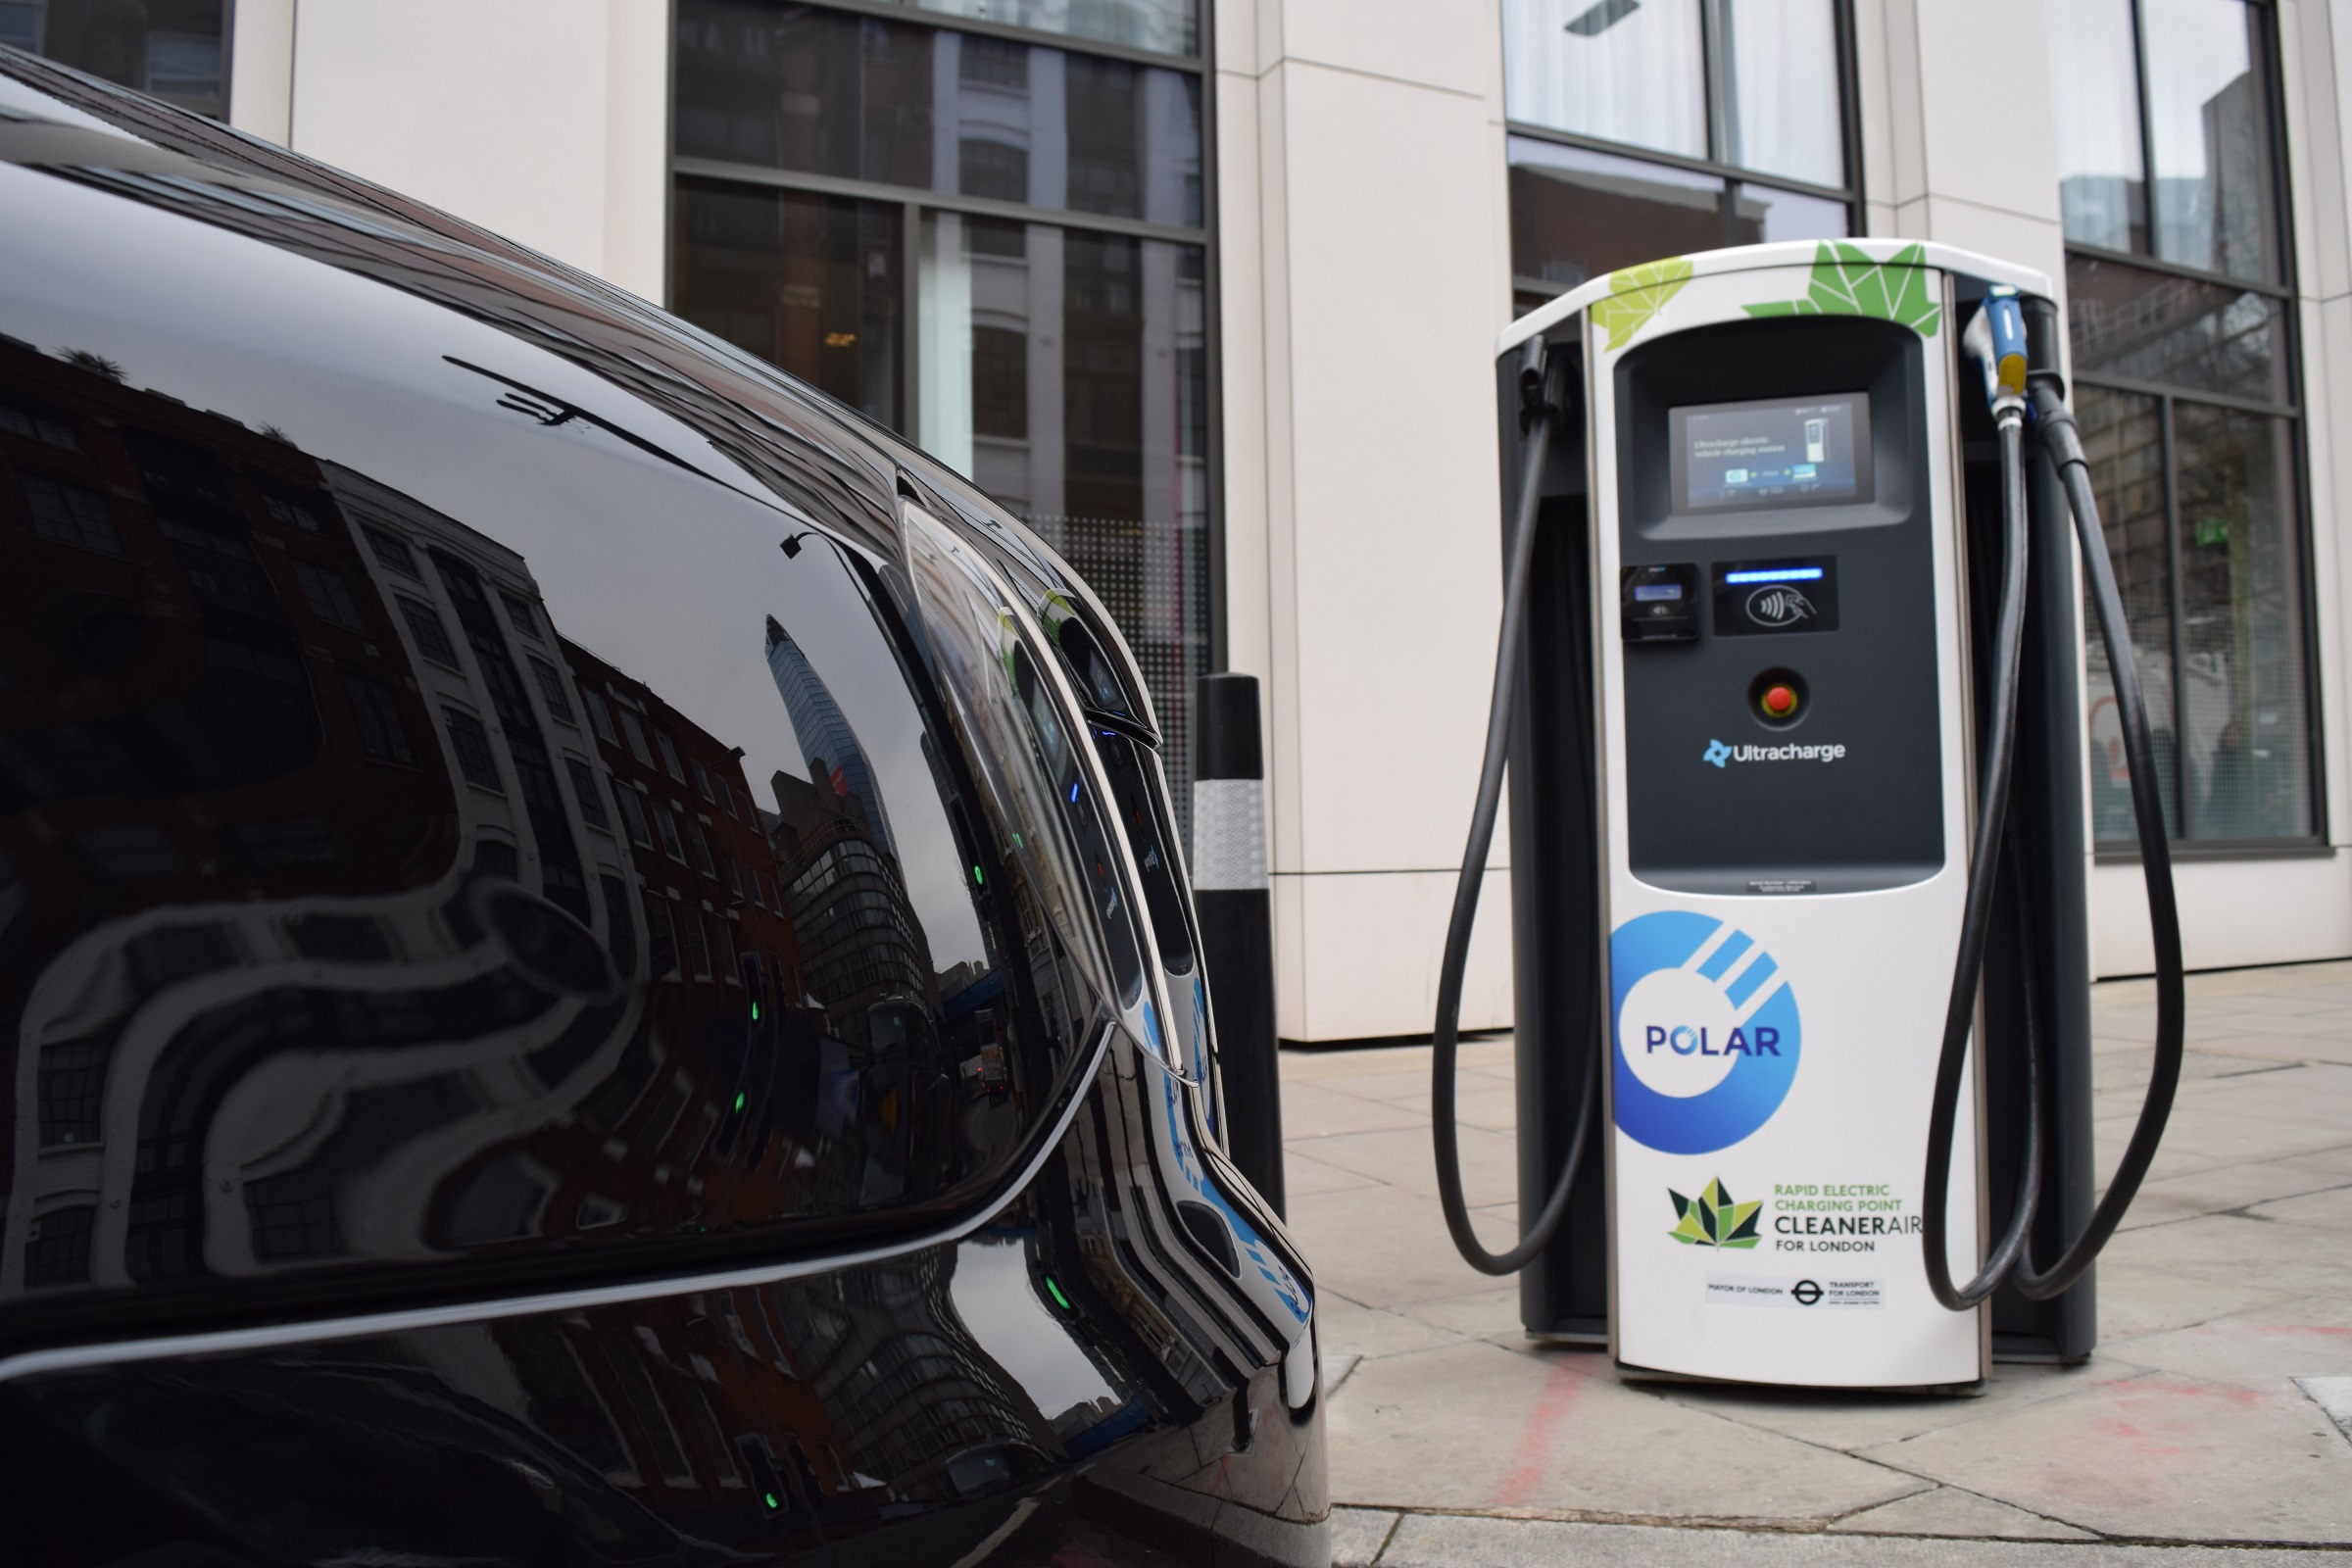 Chargemaster electrifies London with expansion of POLAR Network